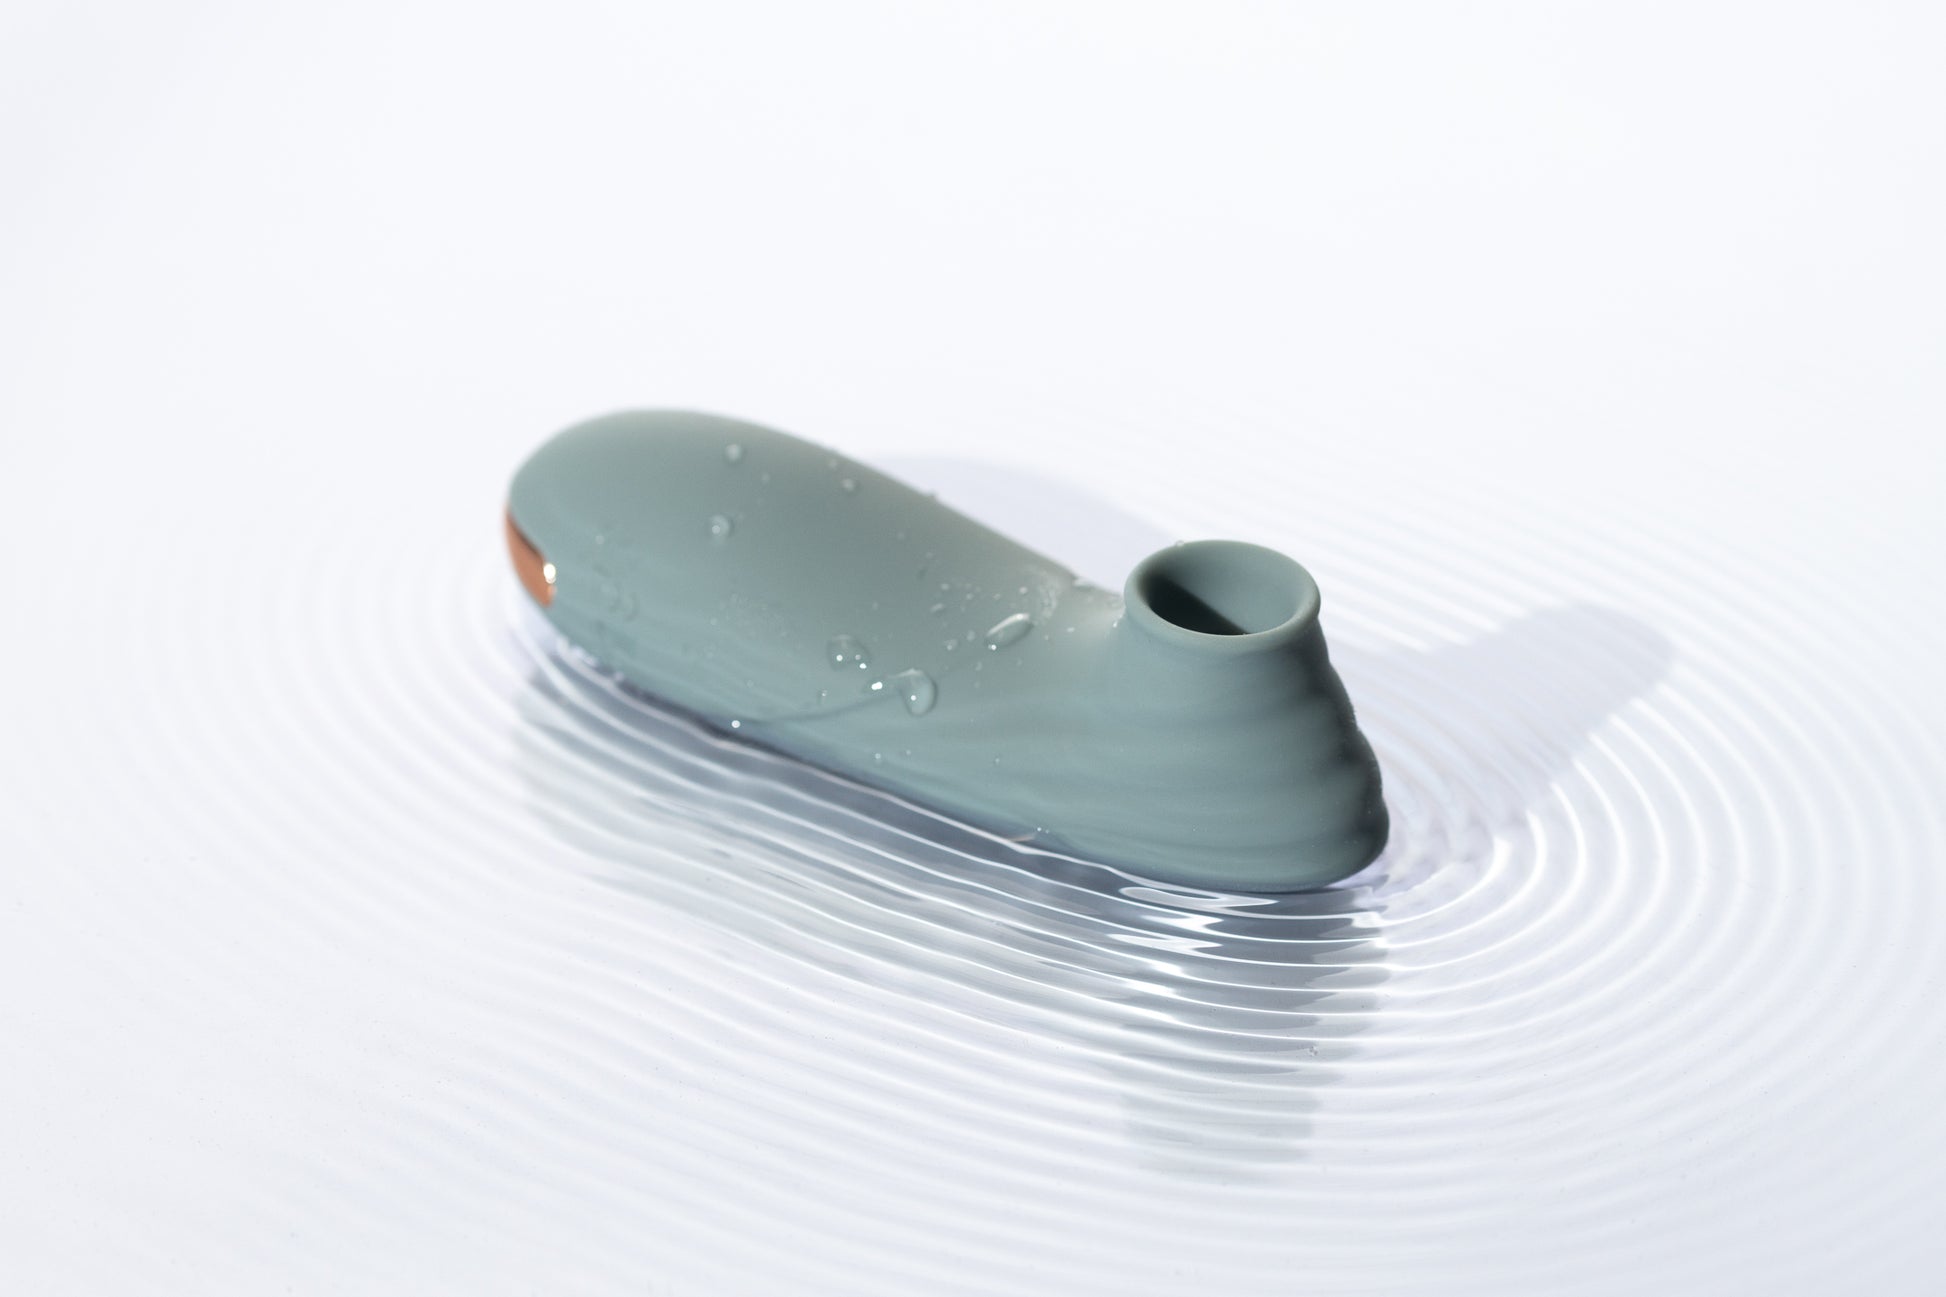 Sensual Suction: Waterproof Vibrator with Multiple Functions - Explore, Enjoy, Repeat